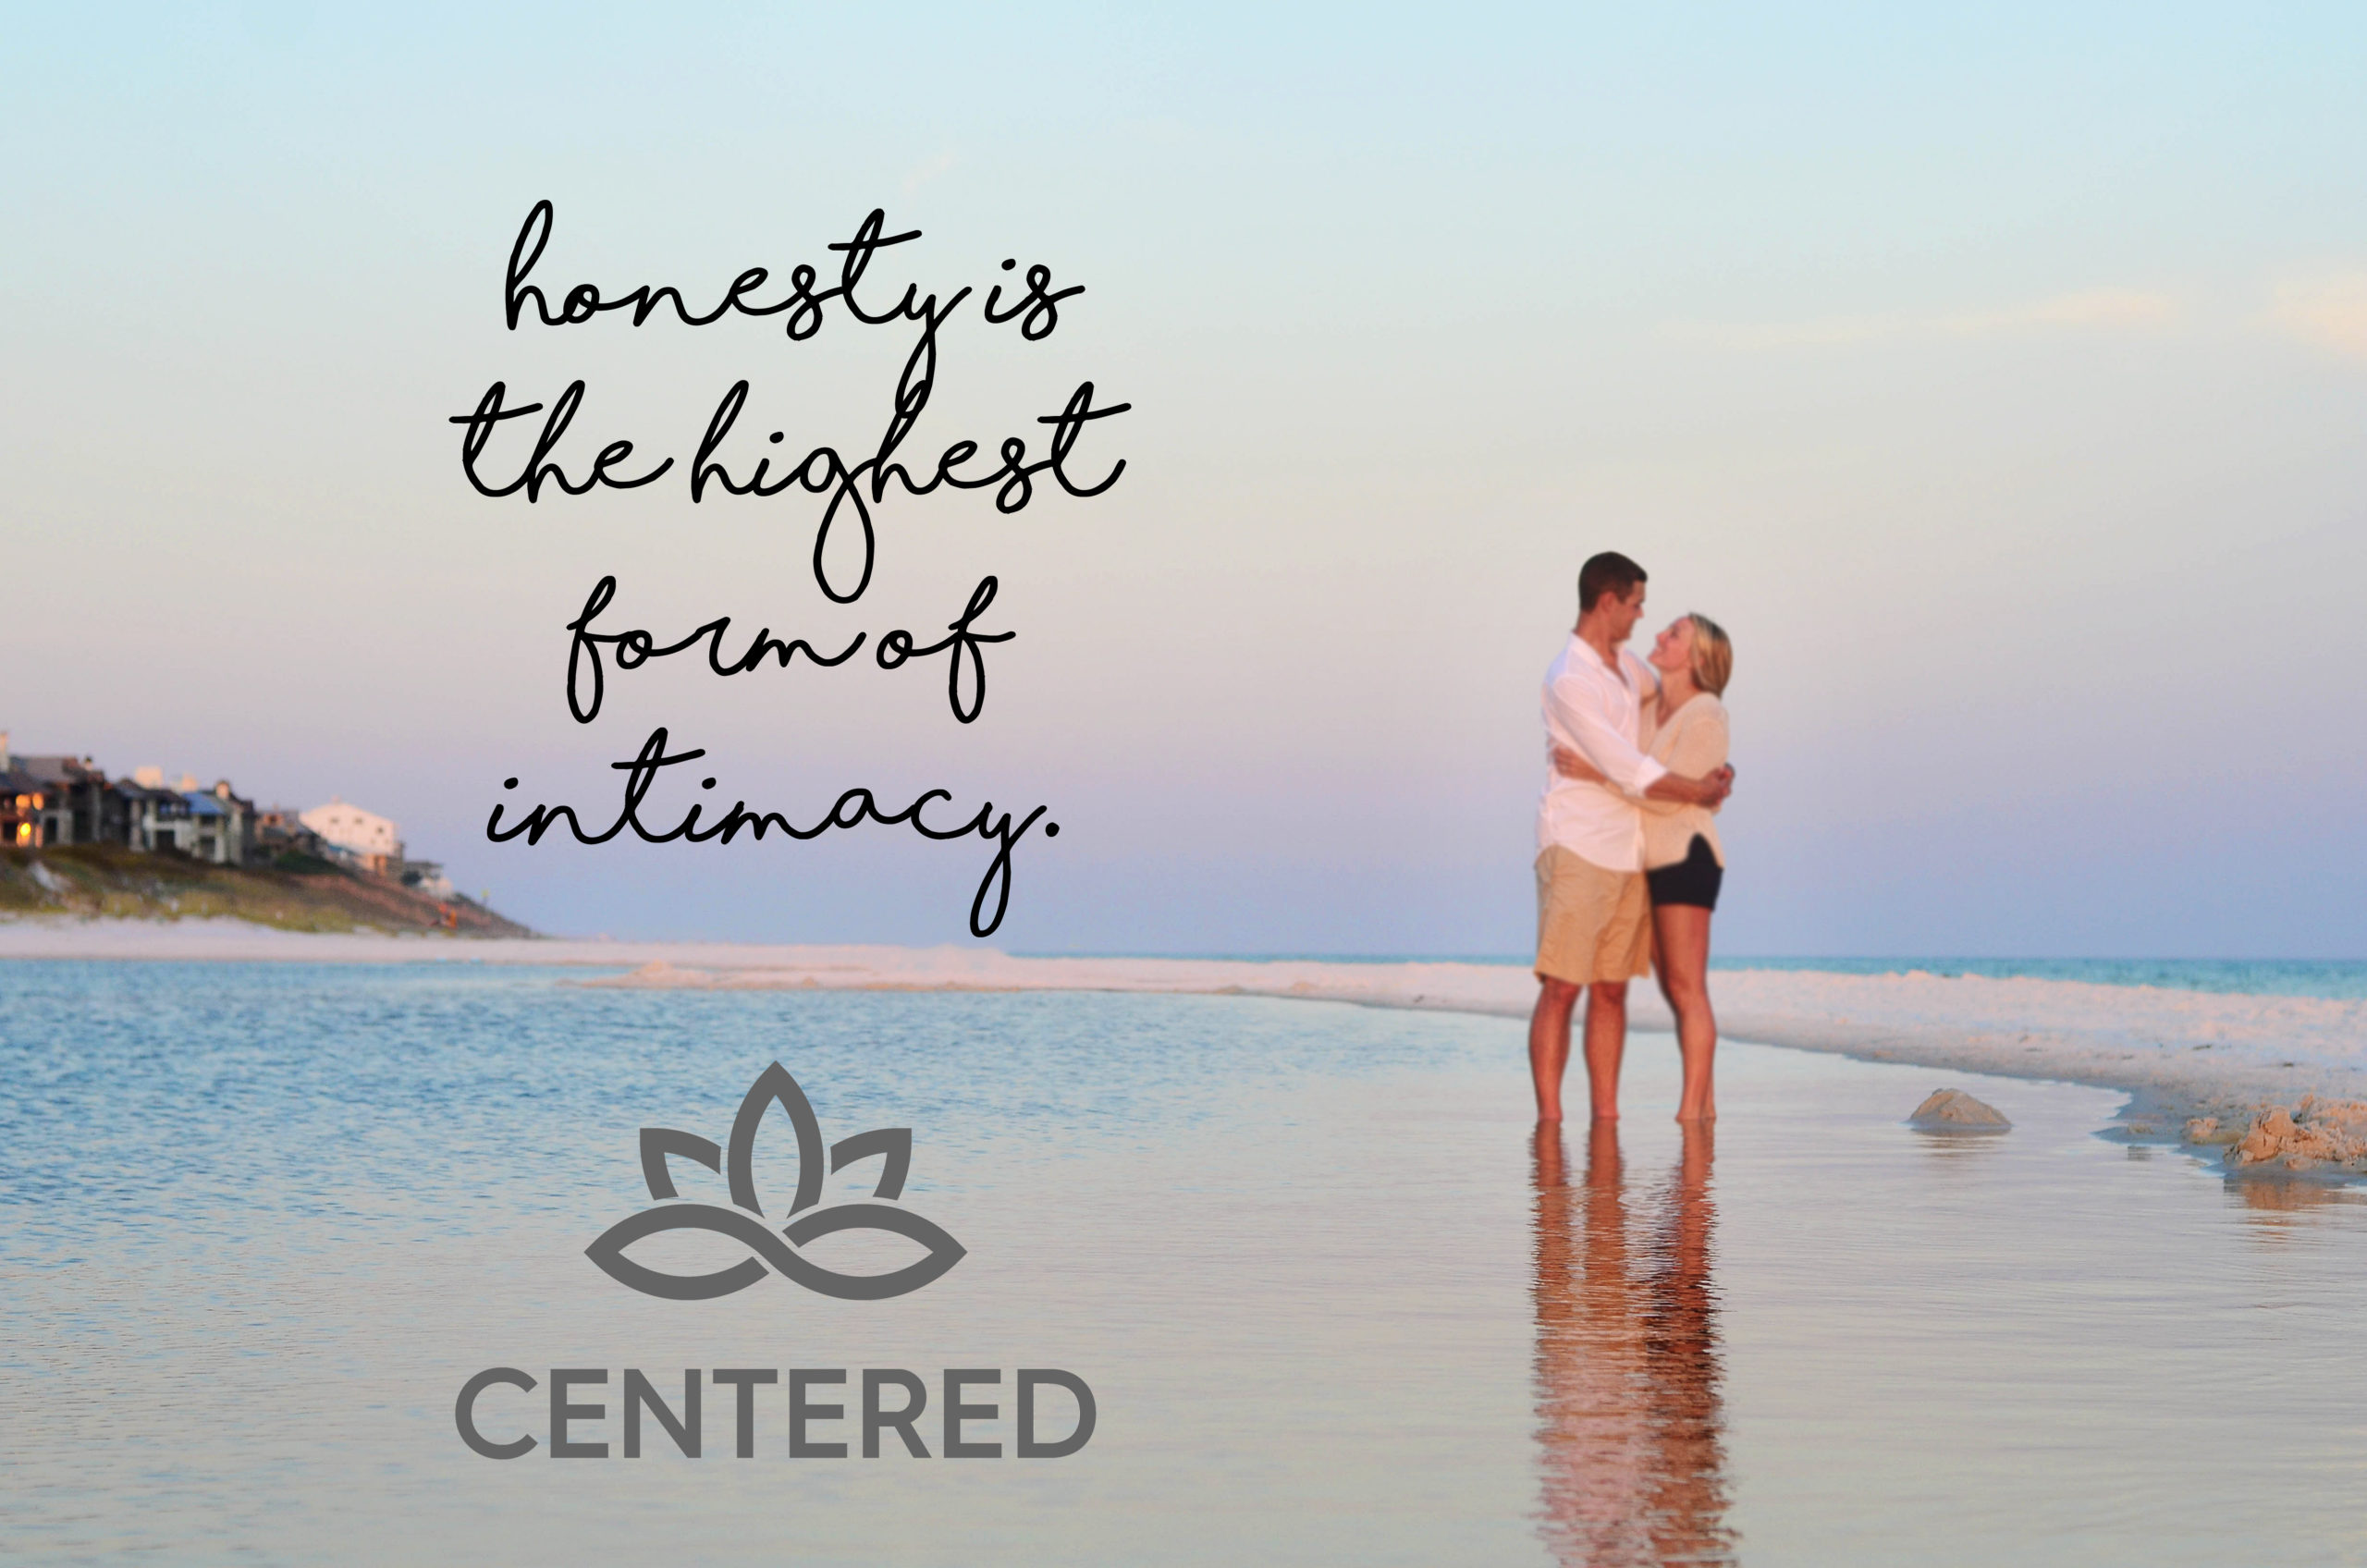 Want a truly honest relationship?